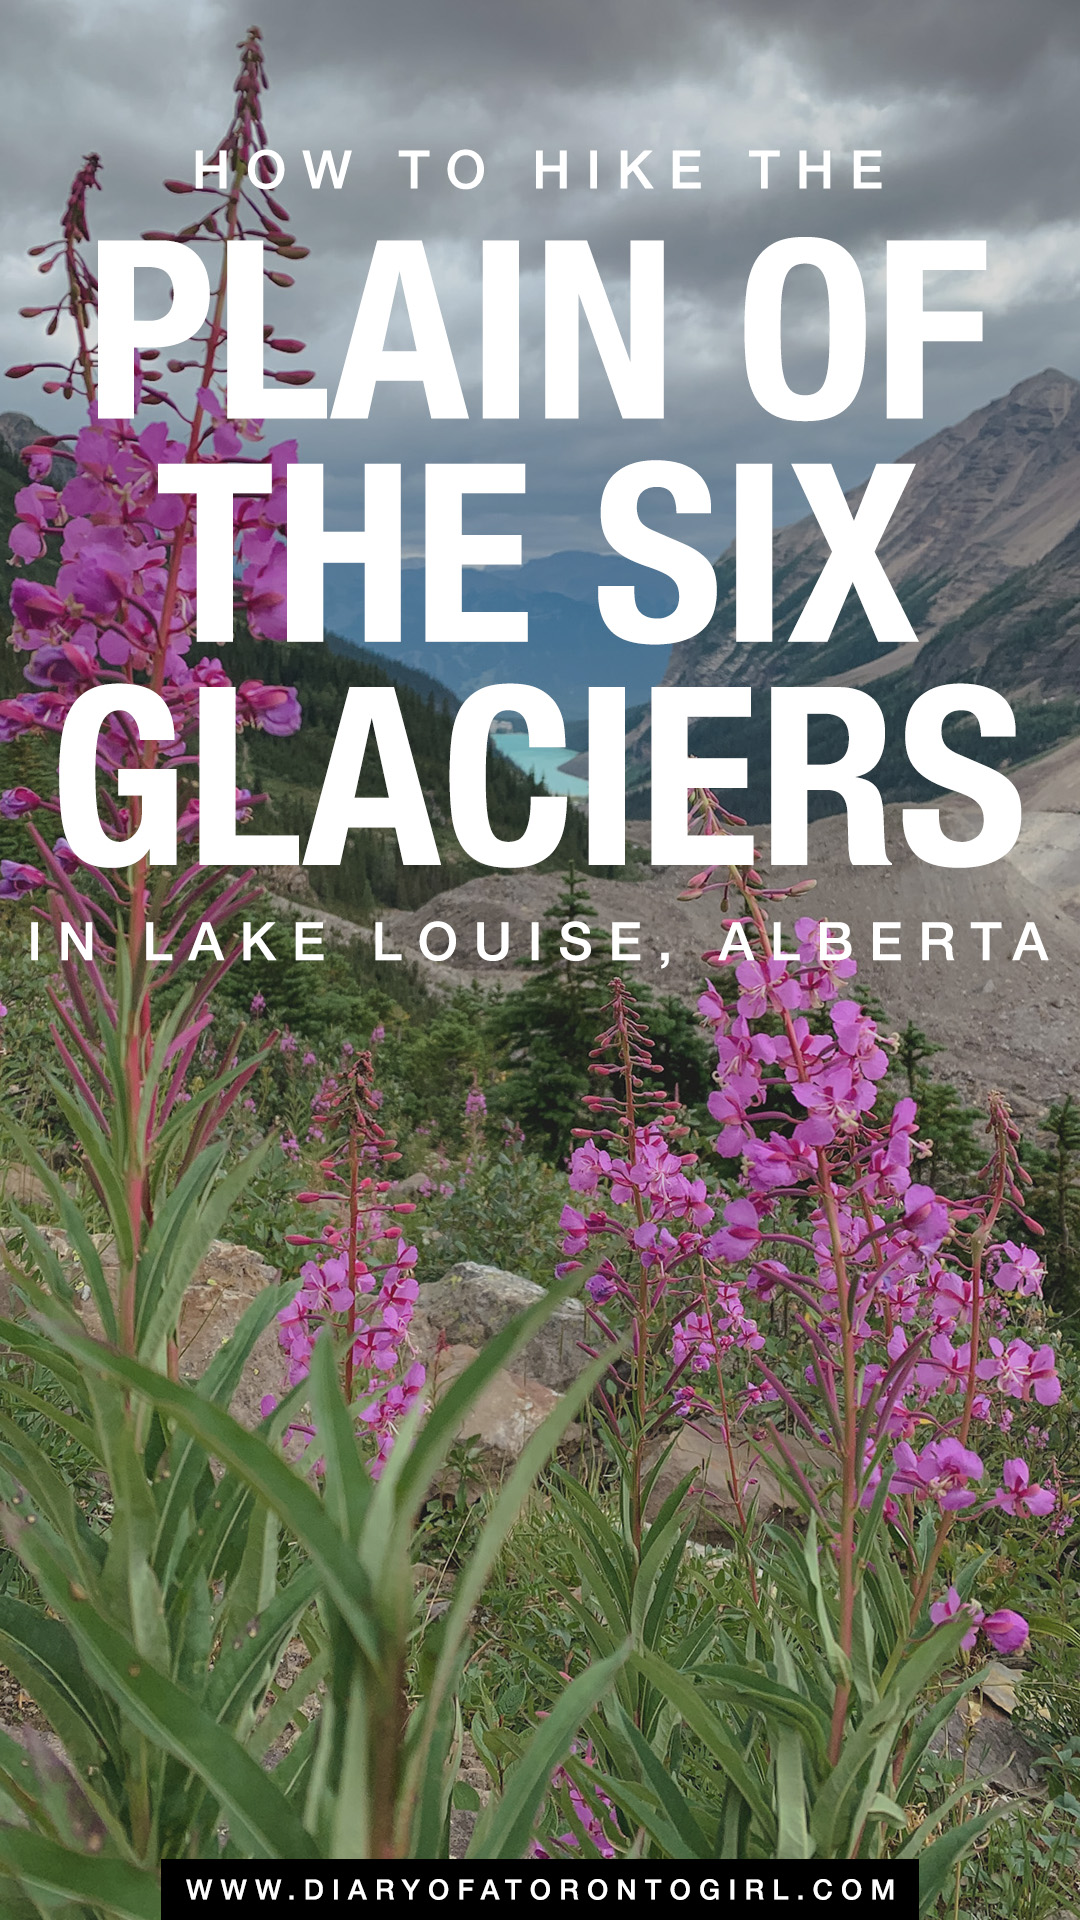 How to hike the Plain of the Six Glaciers in Lake Louise, Alberta